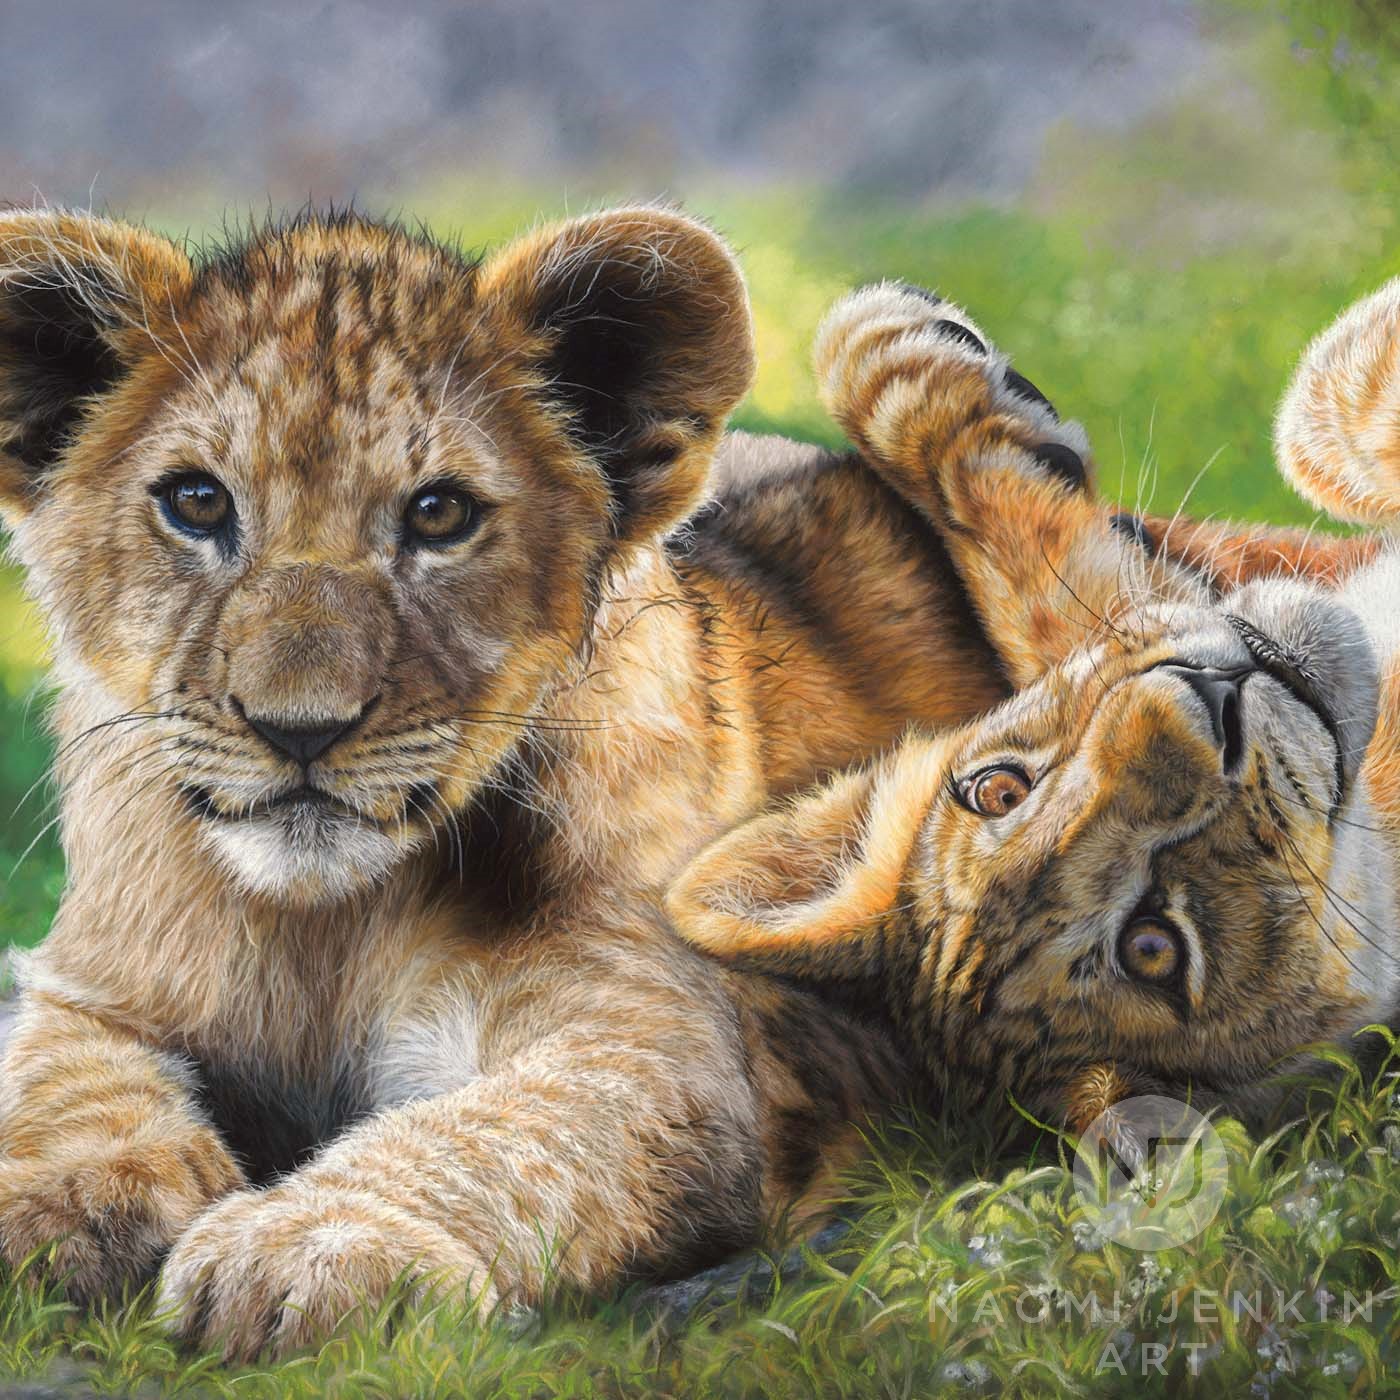 Painting of two young lion cubs by wildlife artist Naomi Jenkin. 